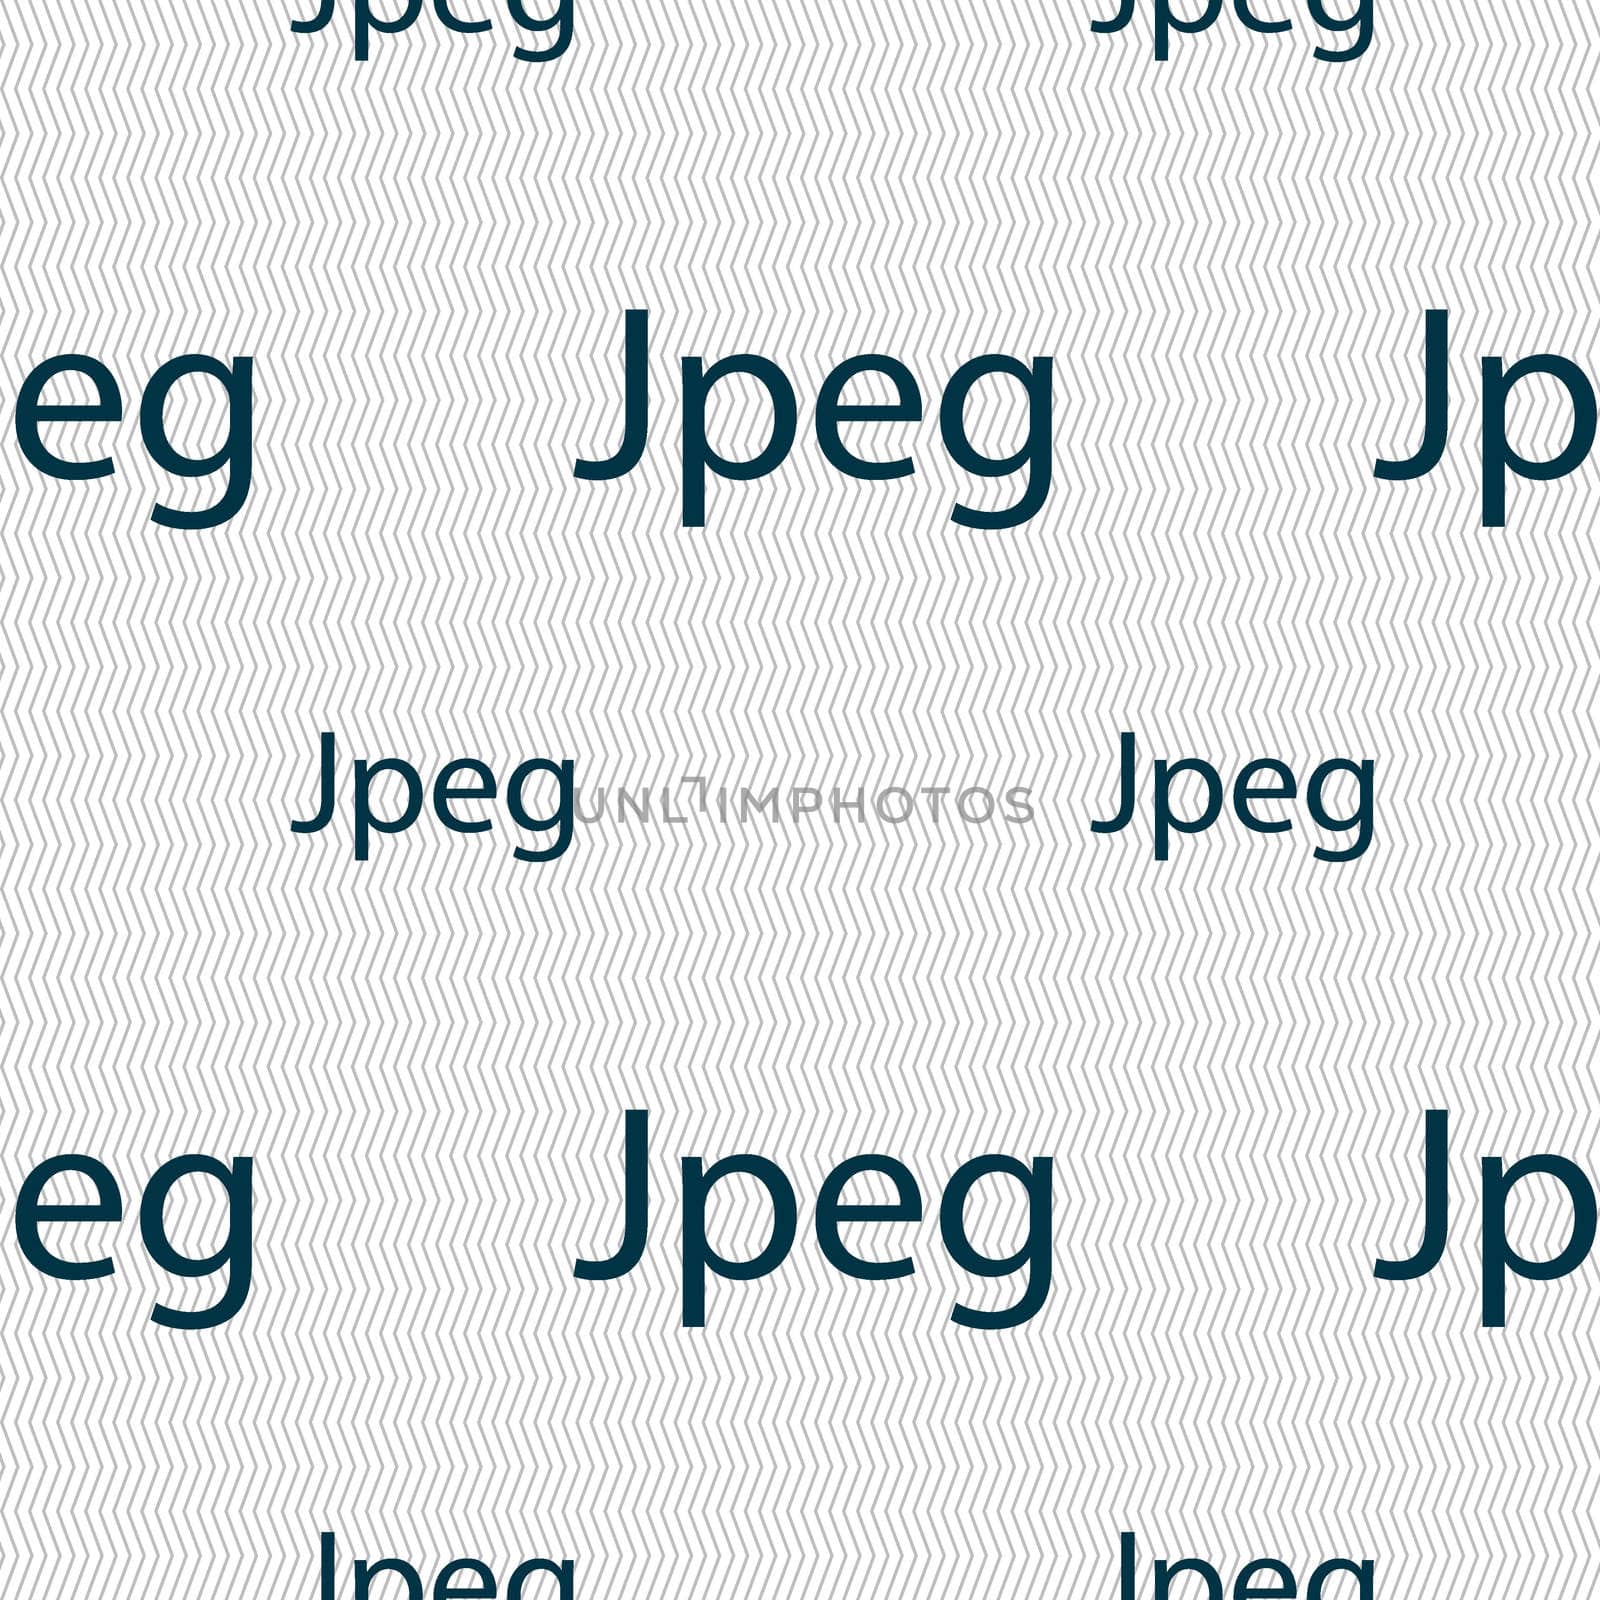 File JPG sign icon. Download image file symbol. Seamless pattern with geometric texture.  by serhii_lohvyniuk